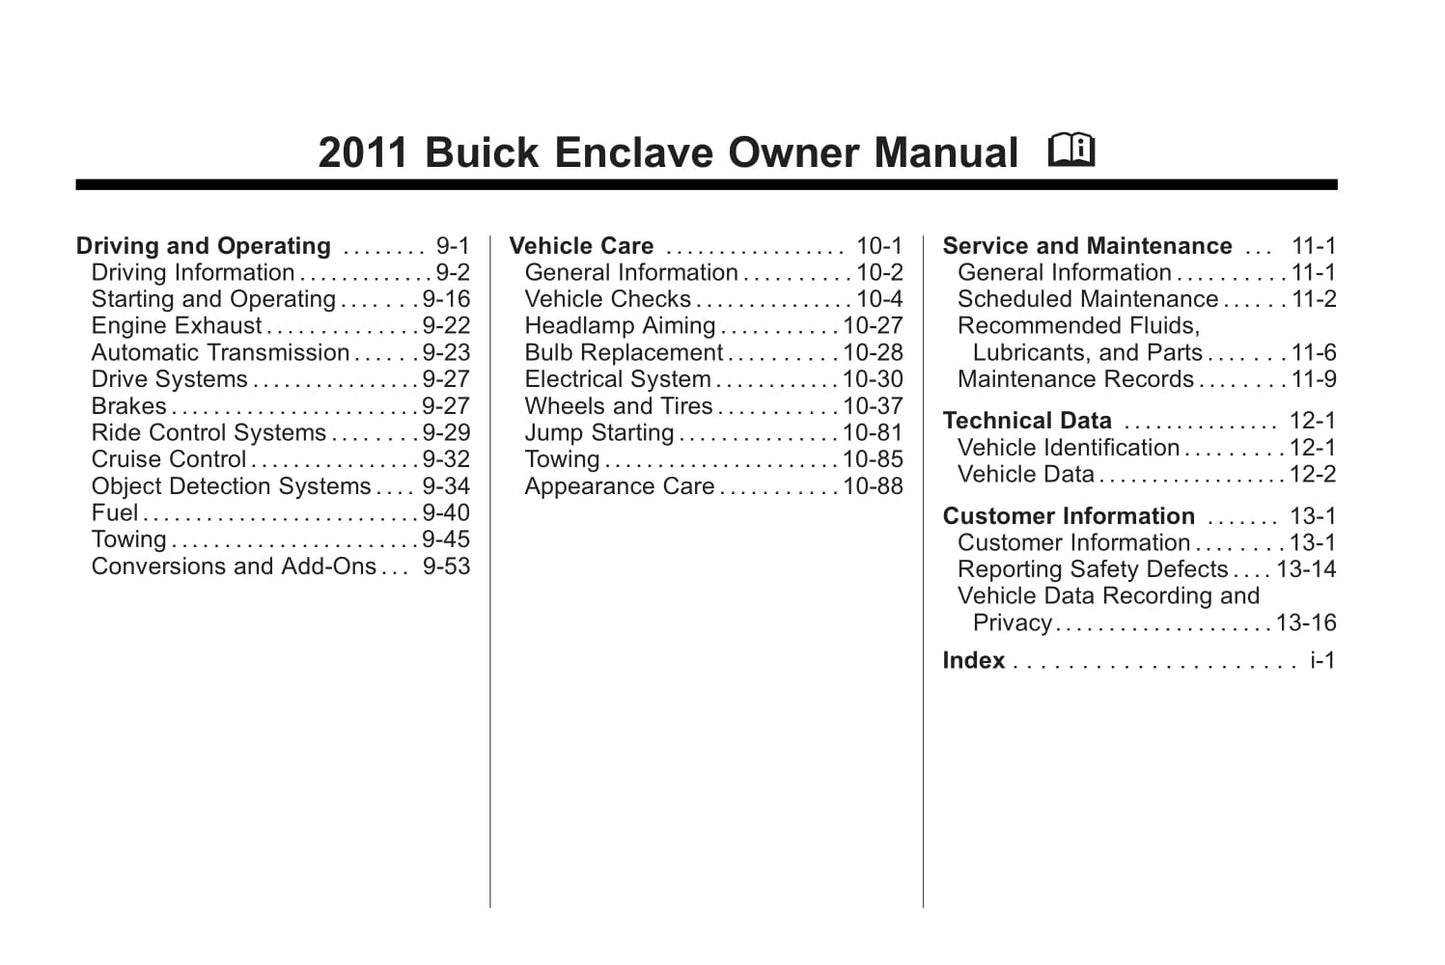 2011 Buick Enclave Owner's Manual | English